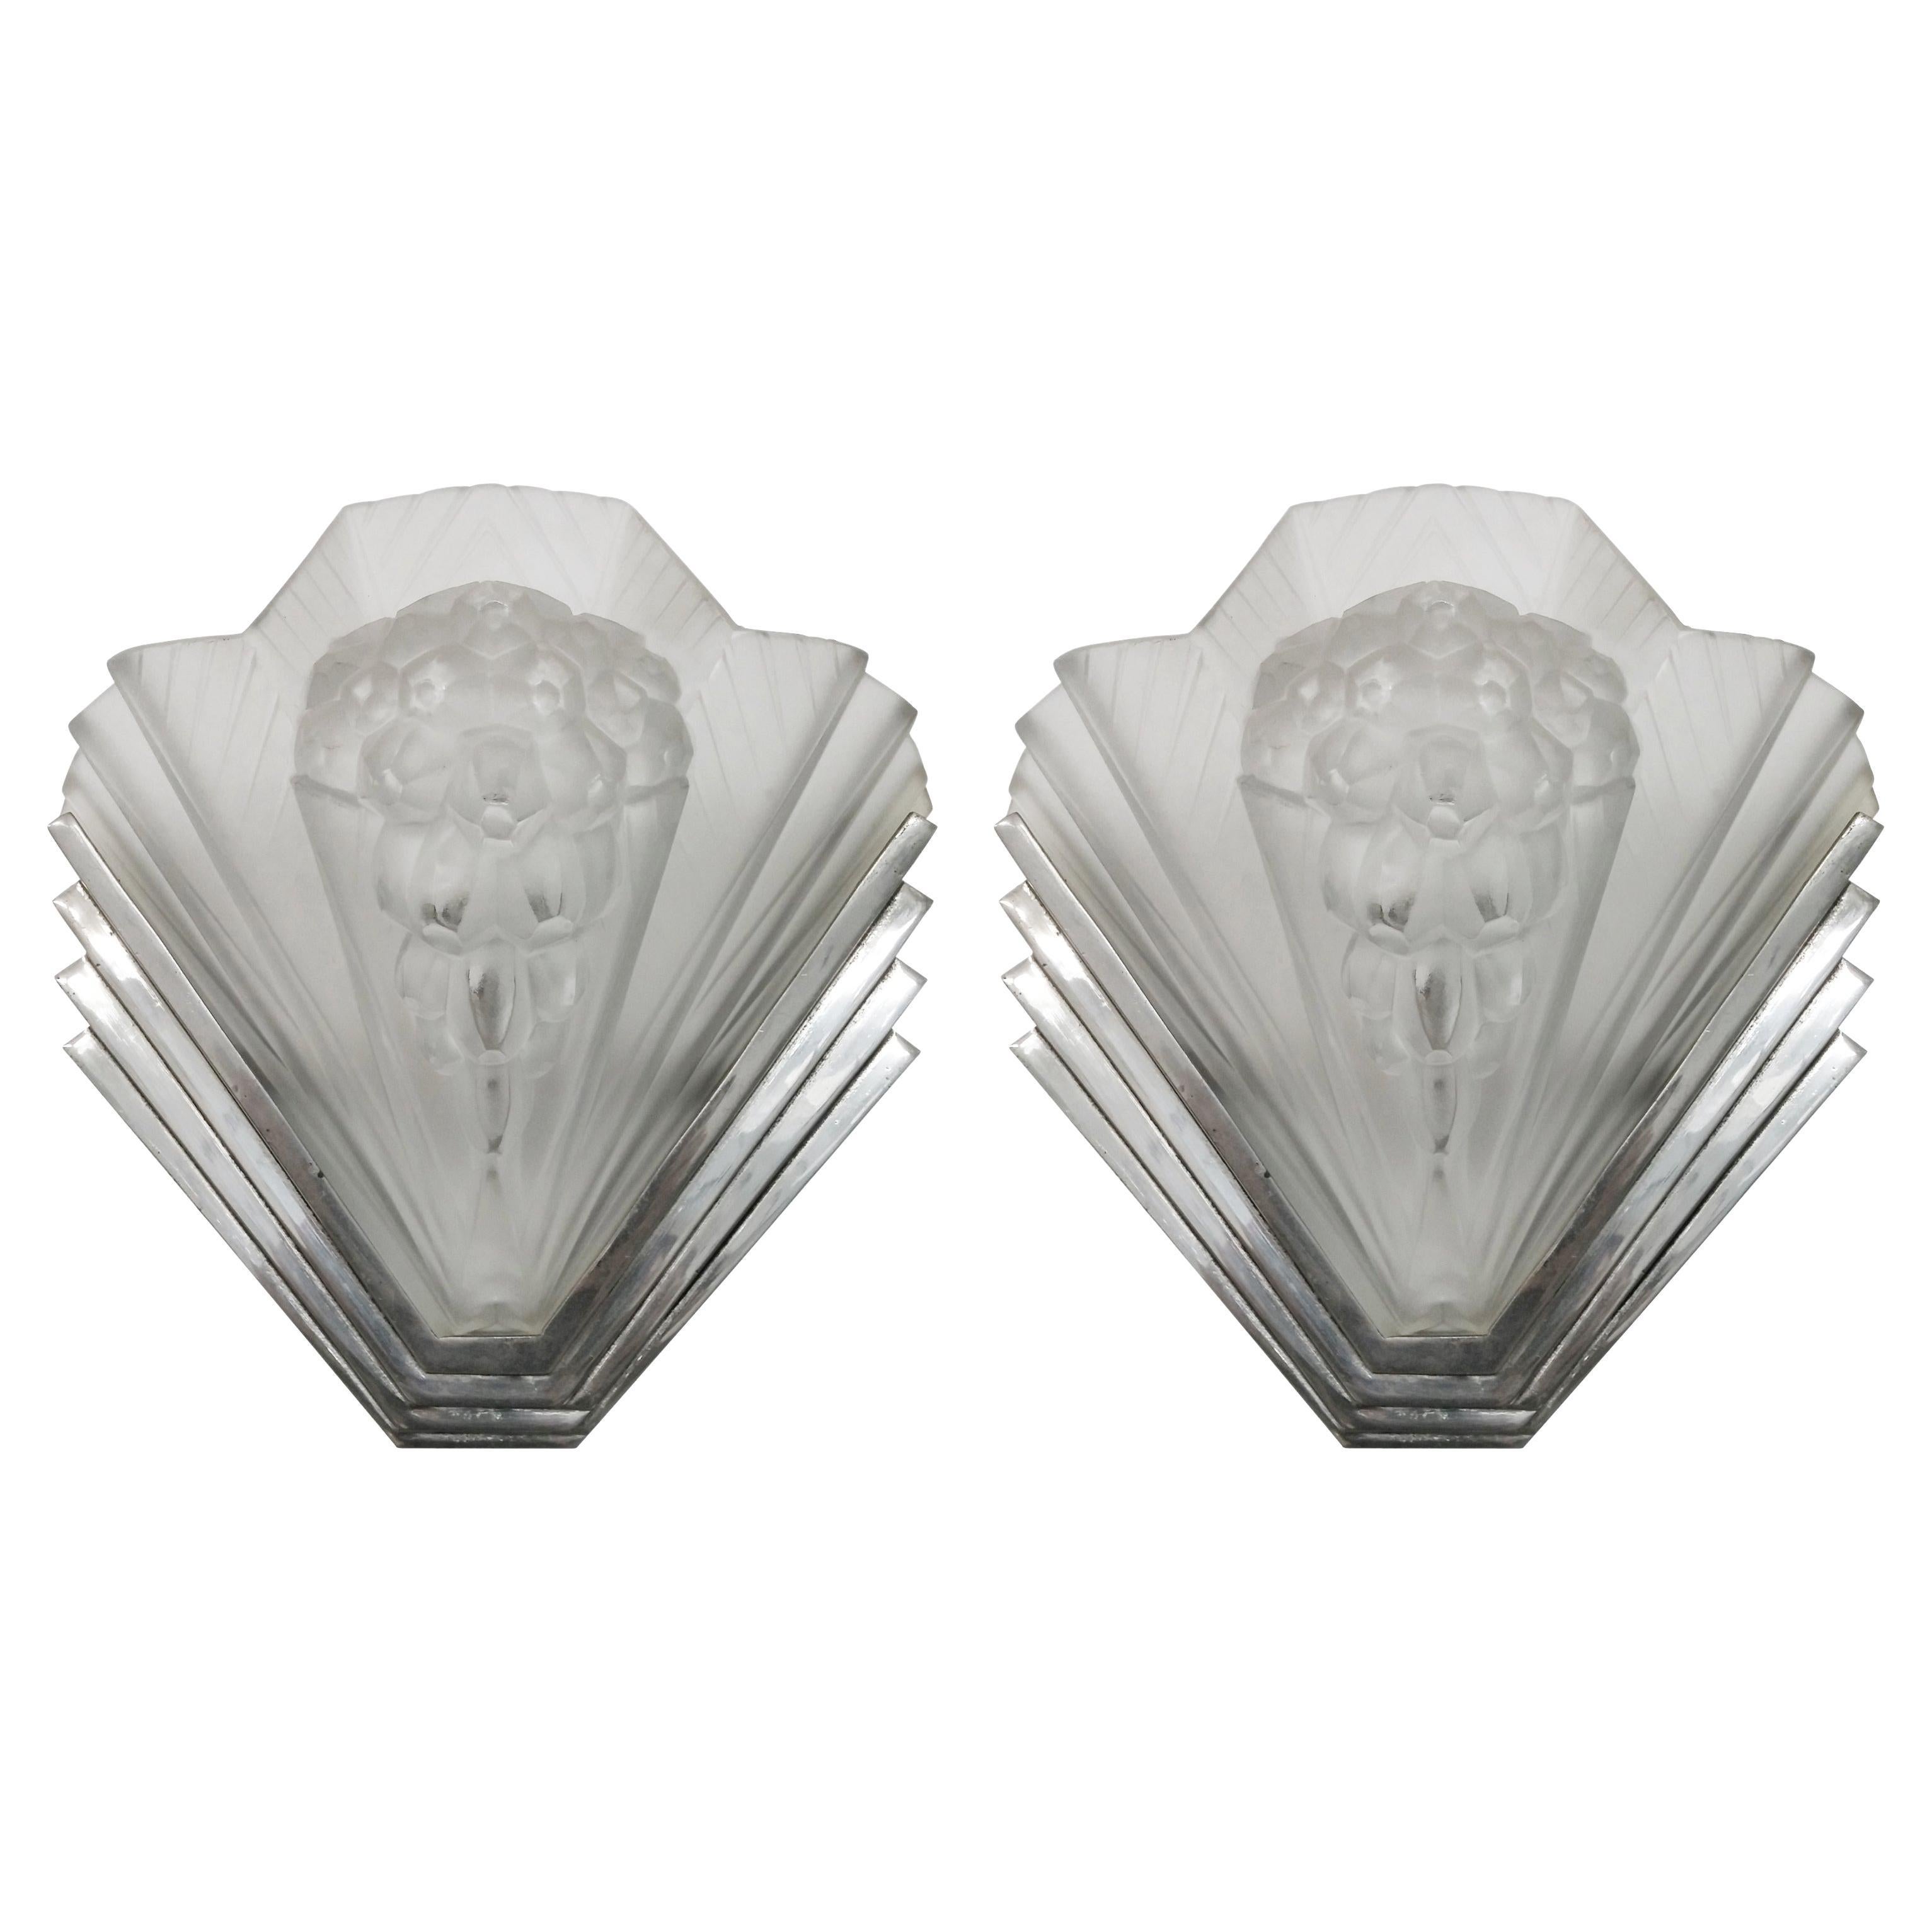 Pair of French Art Deco Wall Sconces Signed by Petitot (2 pairs available) For Sale